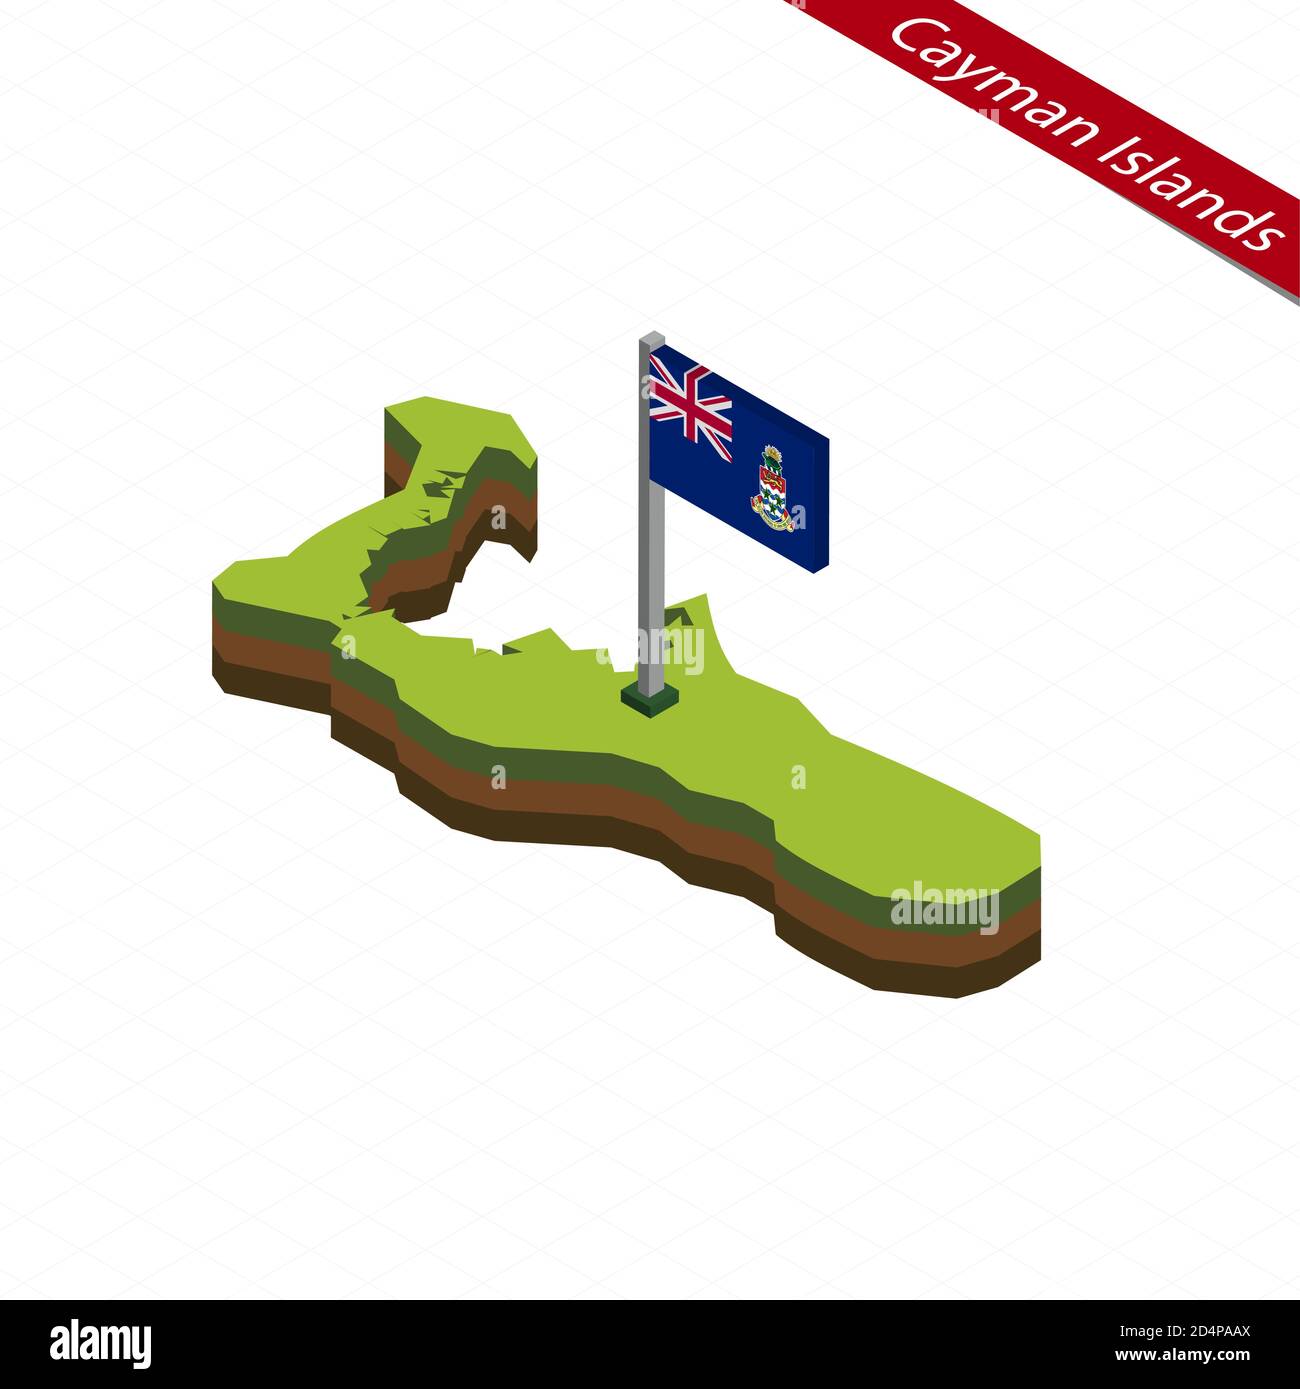 Isometric map and flag of Cayman Islands. 3D isometric shape of Cayman Islands. Vector Illustration. Stock Vector